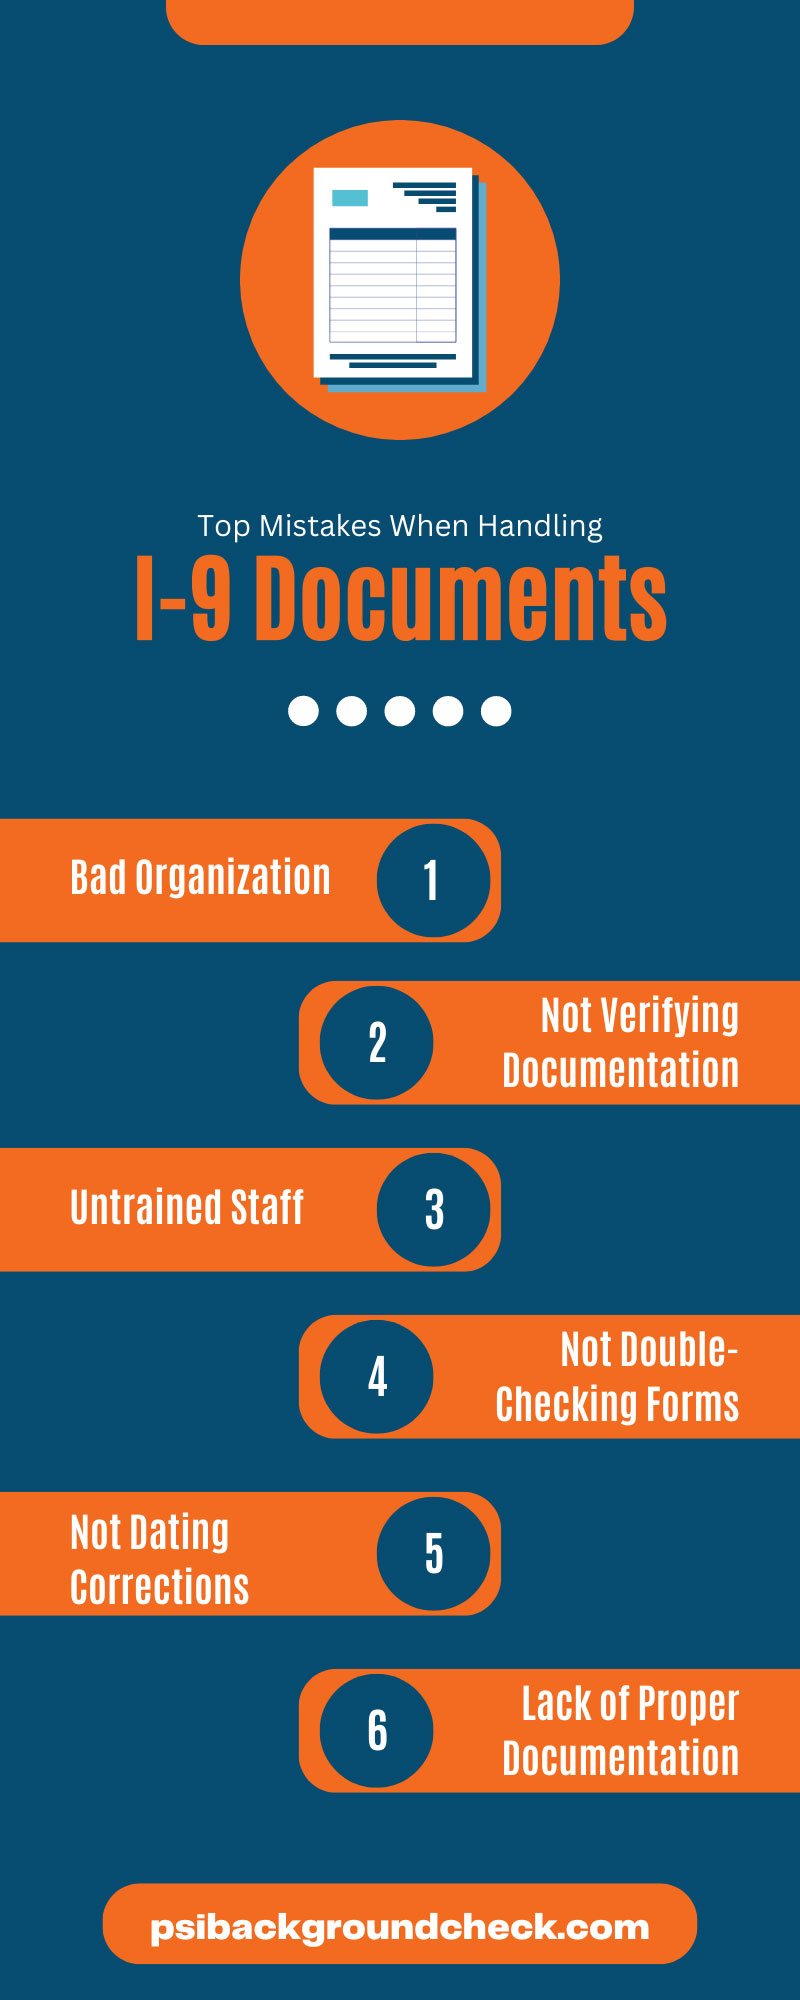 Top 10 Mistakes When Handling I-9 Documents